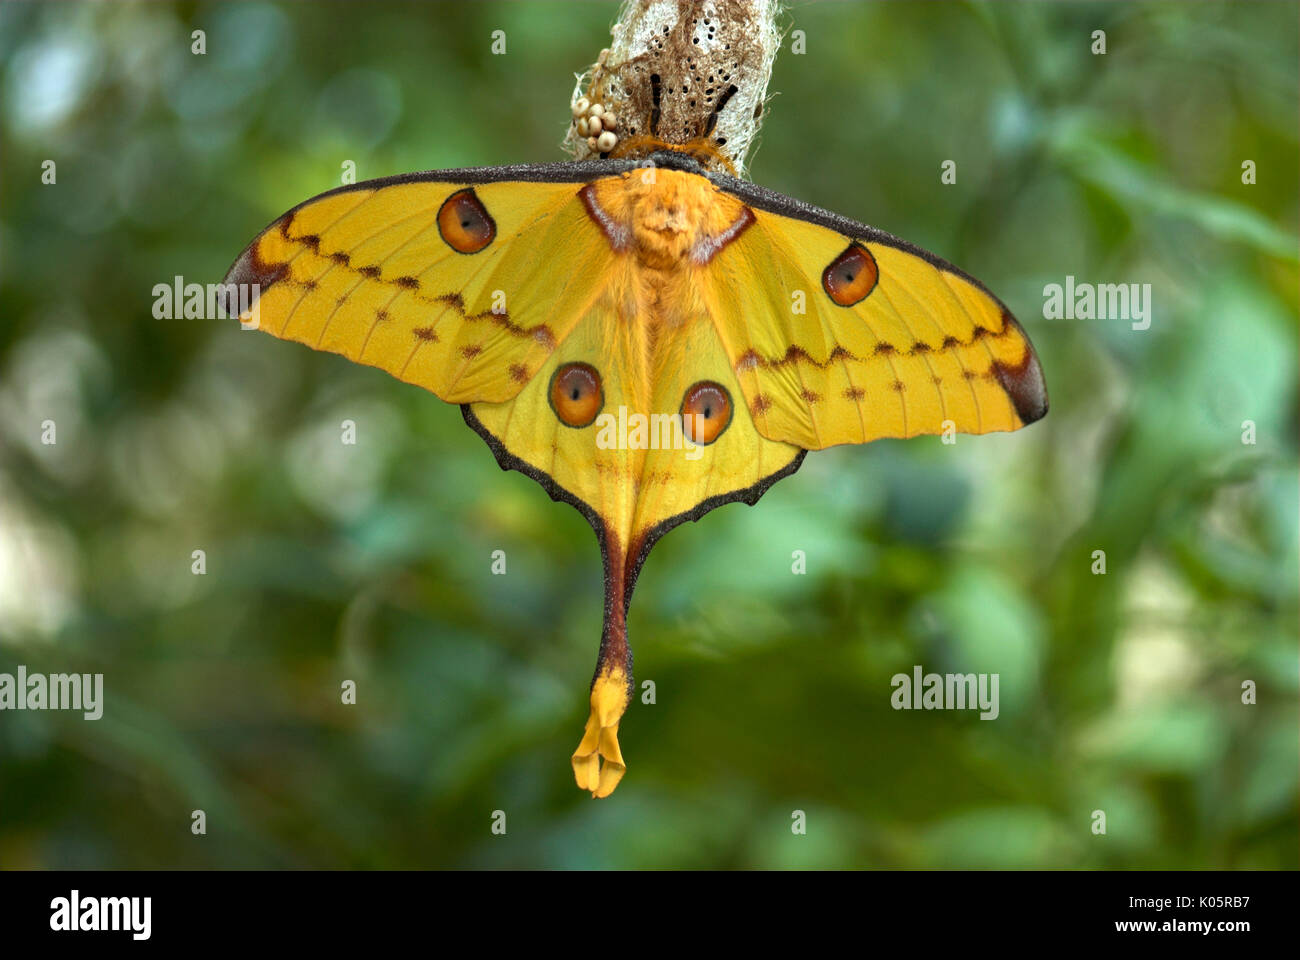 Giant Comet Moth, Argema mittrei, Madagascar, Moon or Lunar, Family: Saturniidae, one of the largest Silk Moths, hanging on cocoon Stock Photo